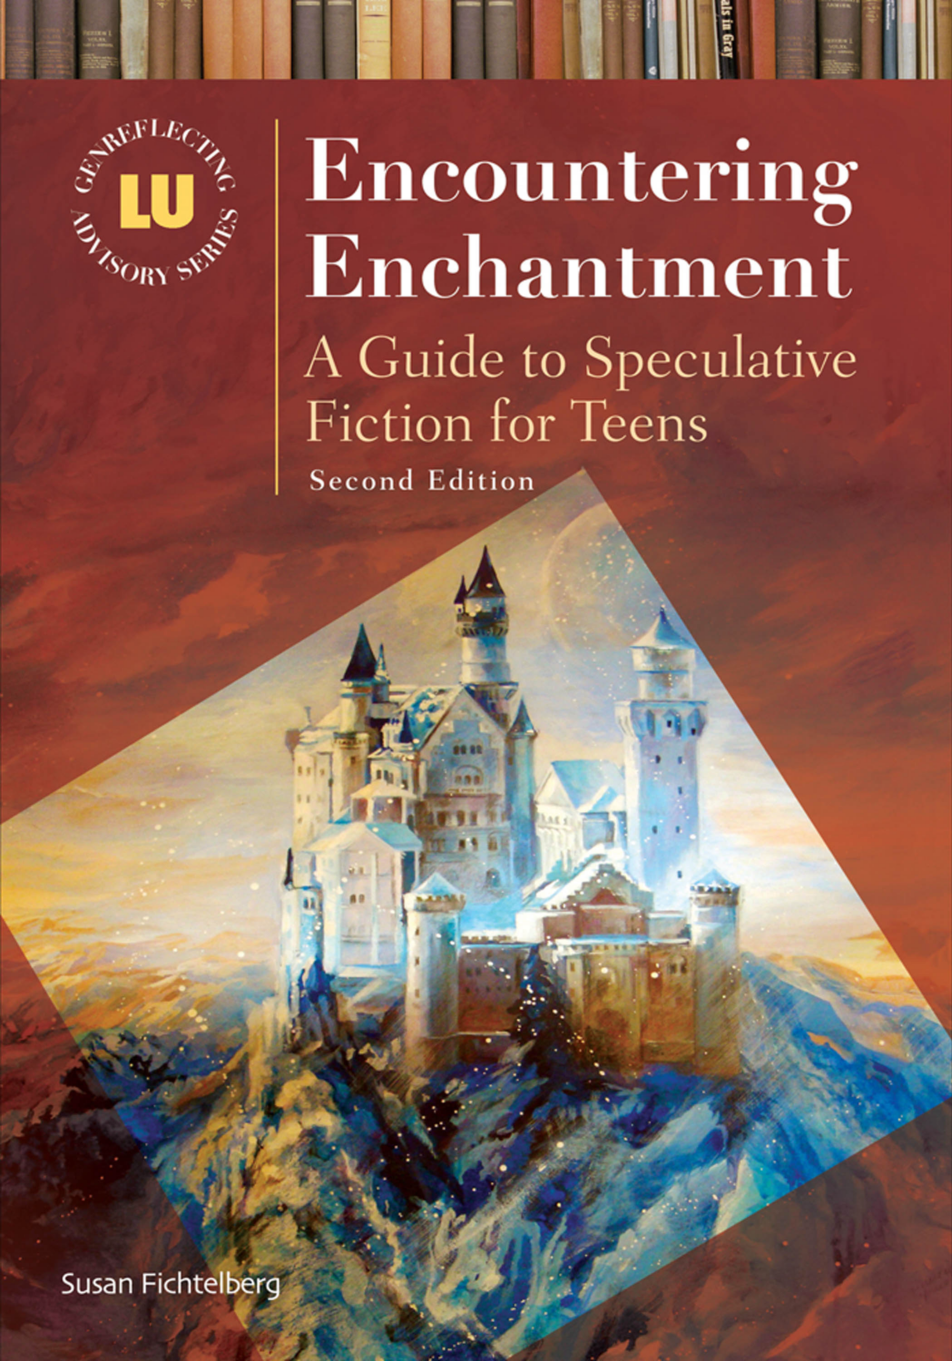 Encountering Enchantment: A Guide to Speculative Fiction for Teens, 2nd Edition page Cover1